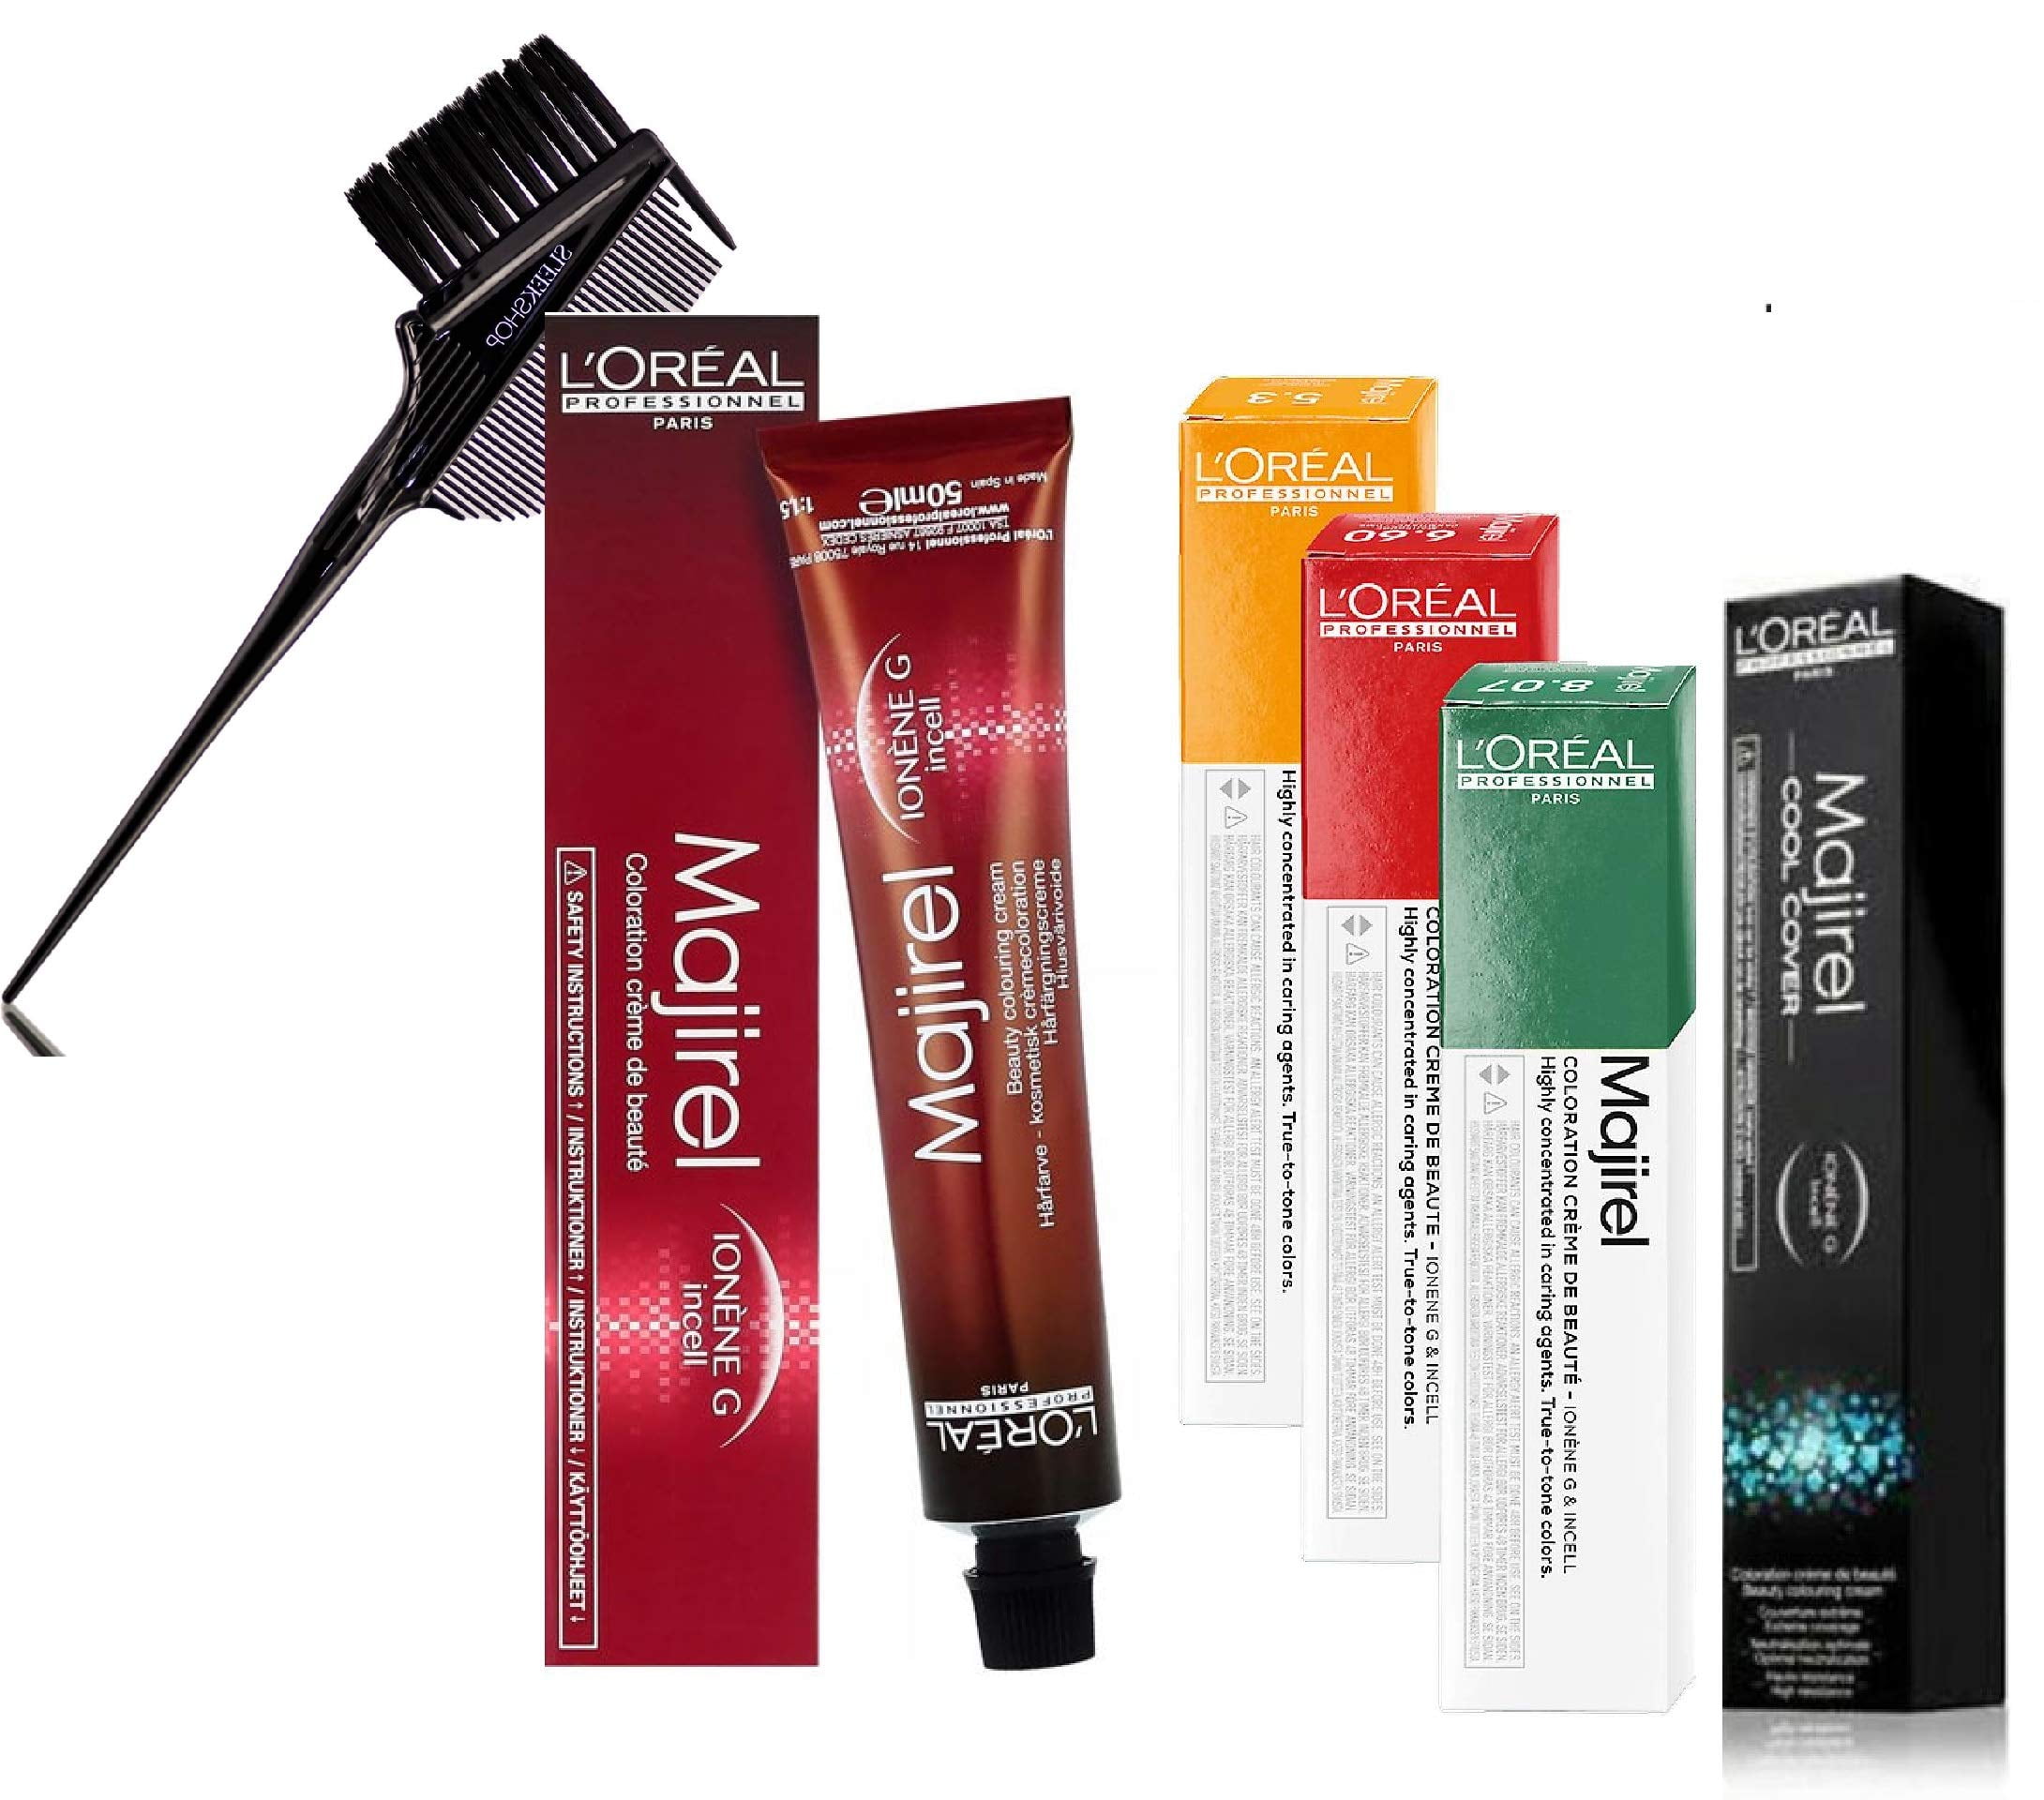 Cool Cover CC  / 7B , L'OREAL MAJIREL Original PRO Colours Ionene G  Beauty Permanent Cream Hair Color Creme Haircolor Dye Loreal - Pack of 3 w/  Sleek 3-in-1 Brush Comb 